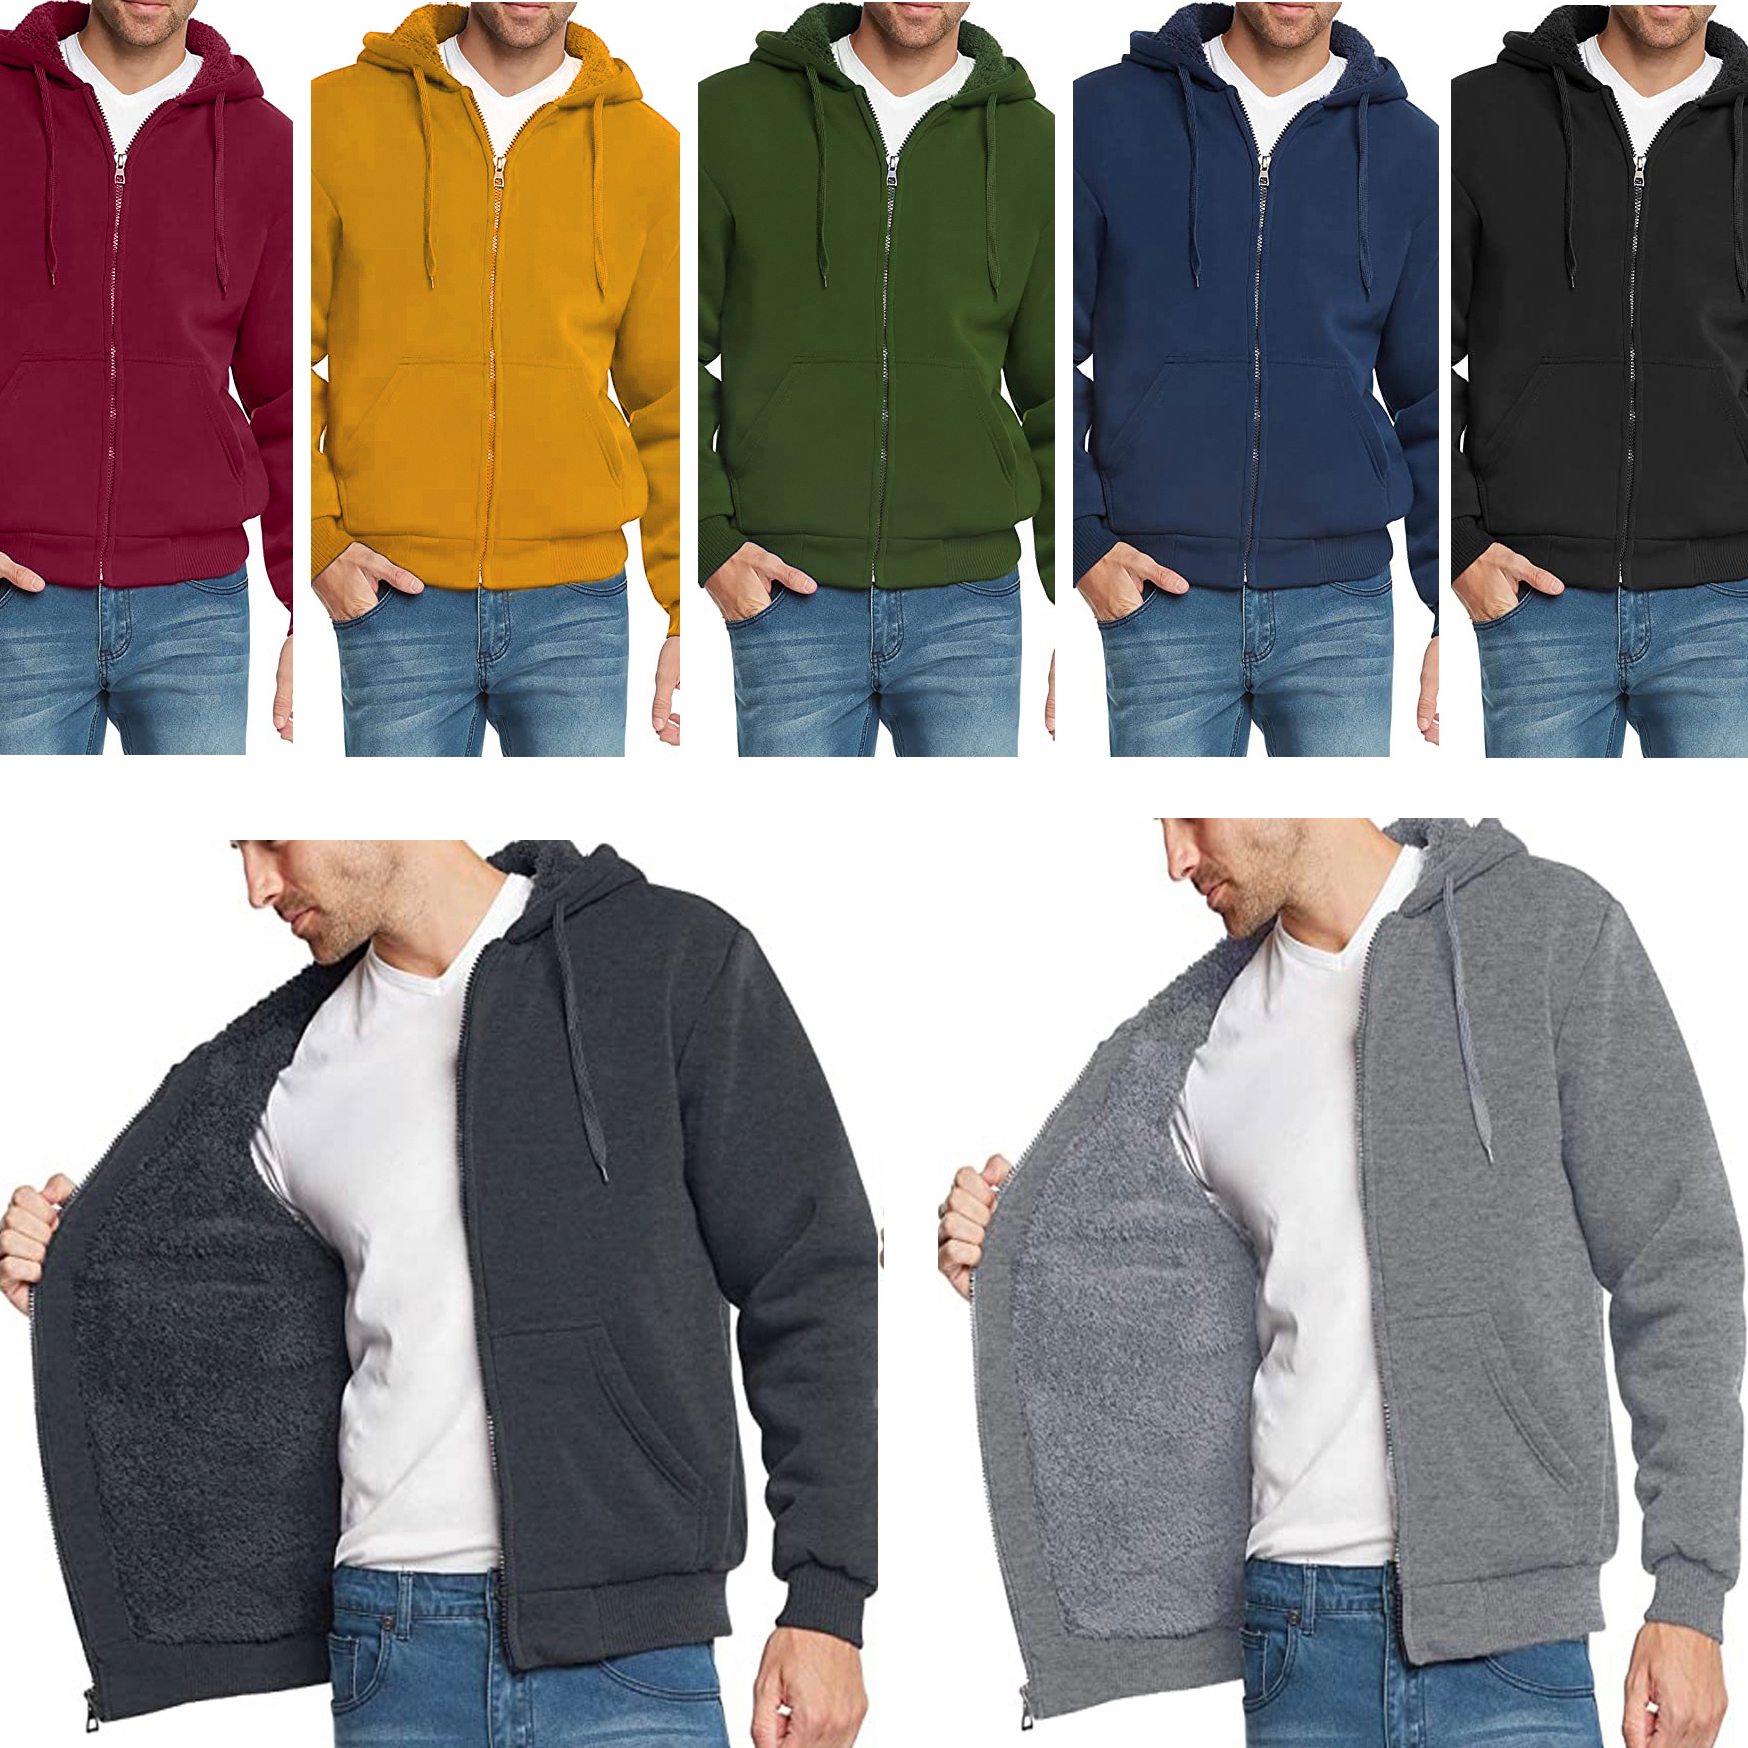 Men's Extra-Thick Sherpa Lined Fleece Hoodie (Big & Tall Sizes Available) - Navy, 4XL